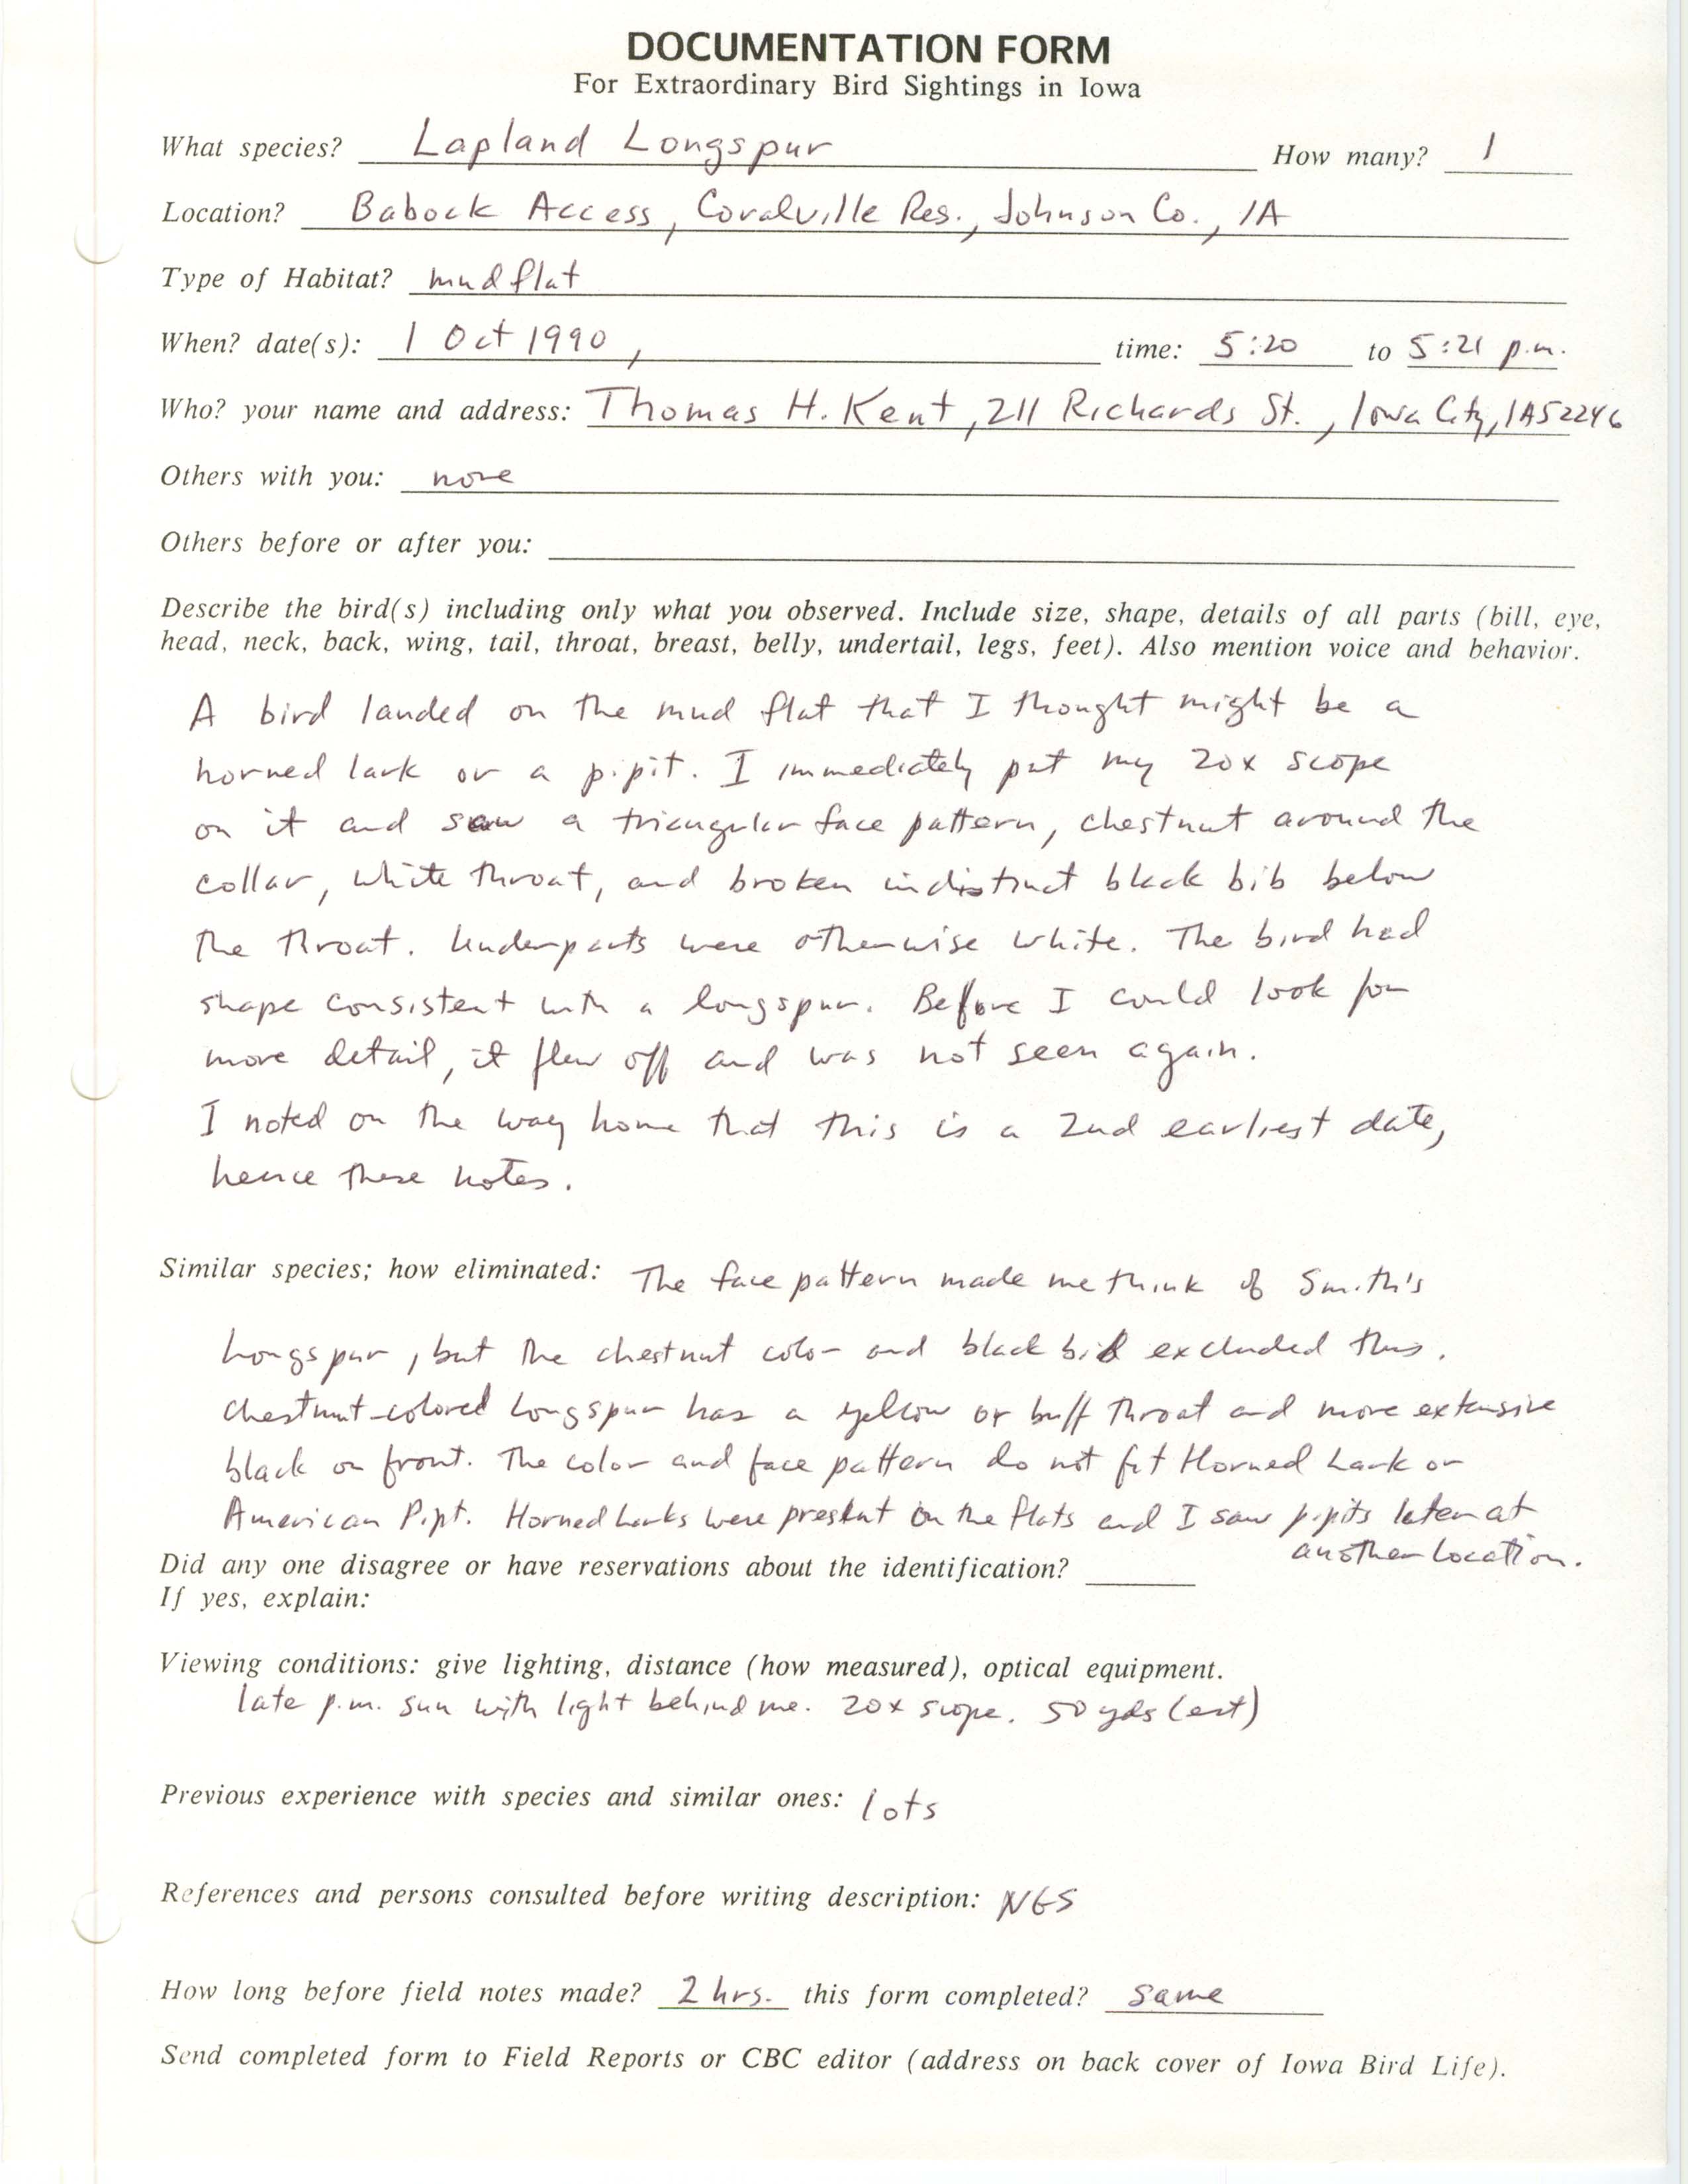 Rare bird documentation form for Lapland Longspur at Babcock Access at Hawkeye Wildlife Area, 1990